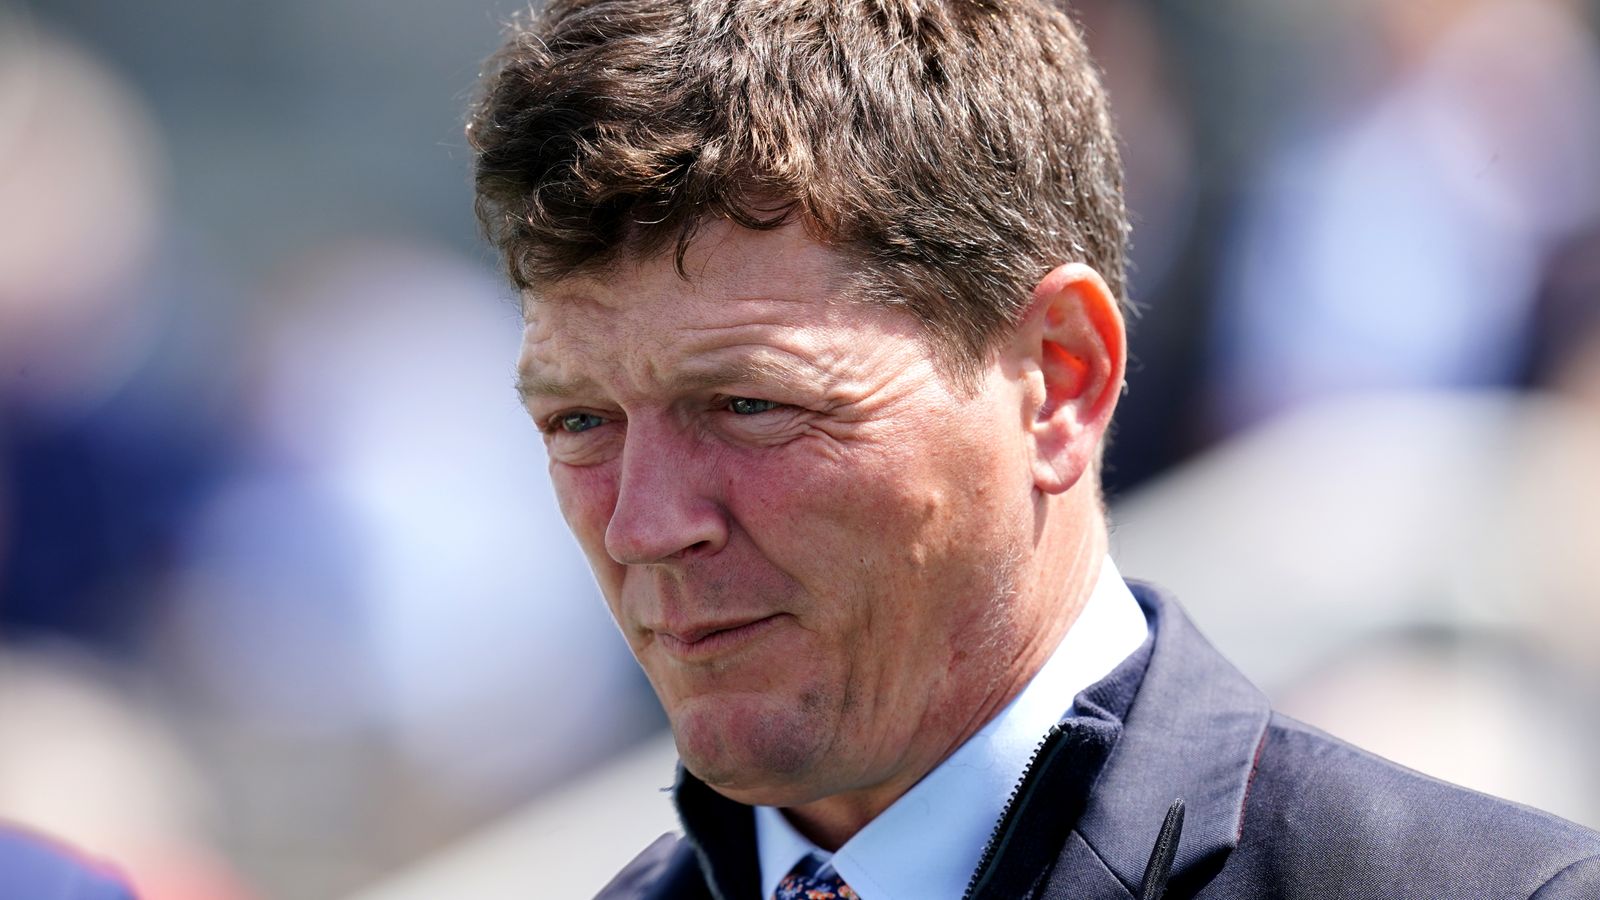 Today on Sky Sports Racing: Andrew Balding’s Aztec Empire handed handicap debut in hot Southwell contest